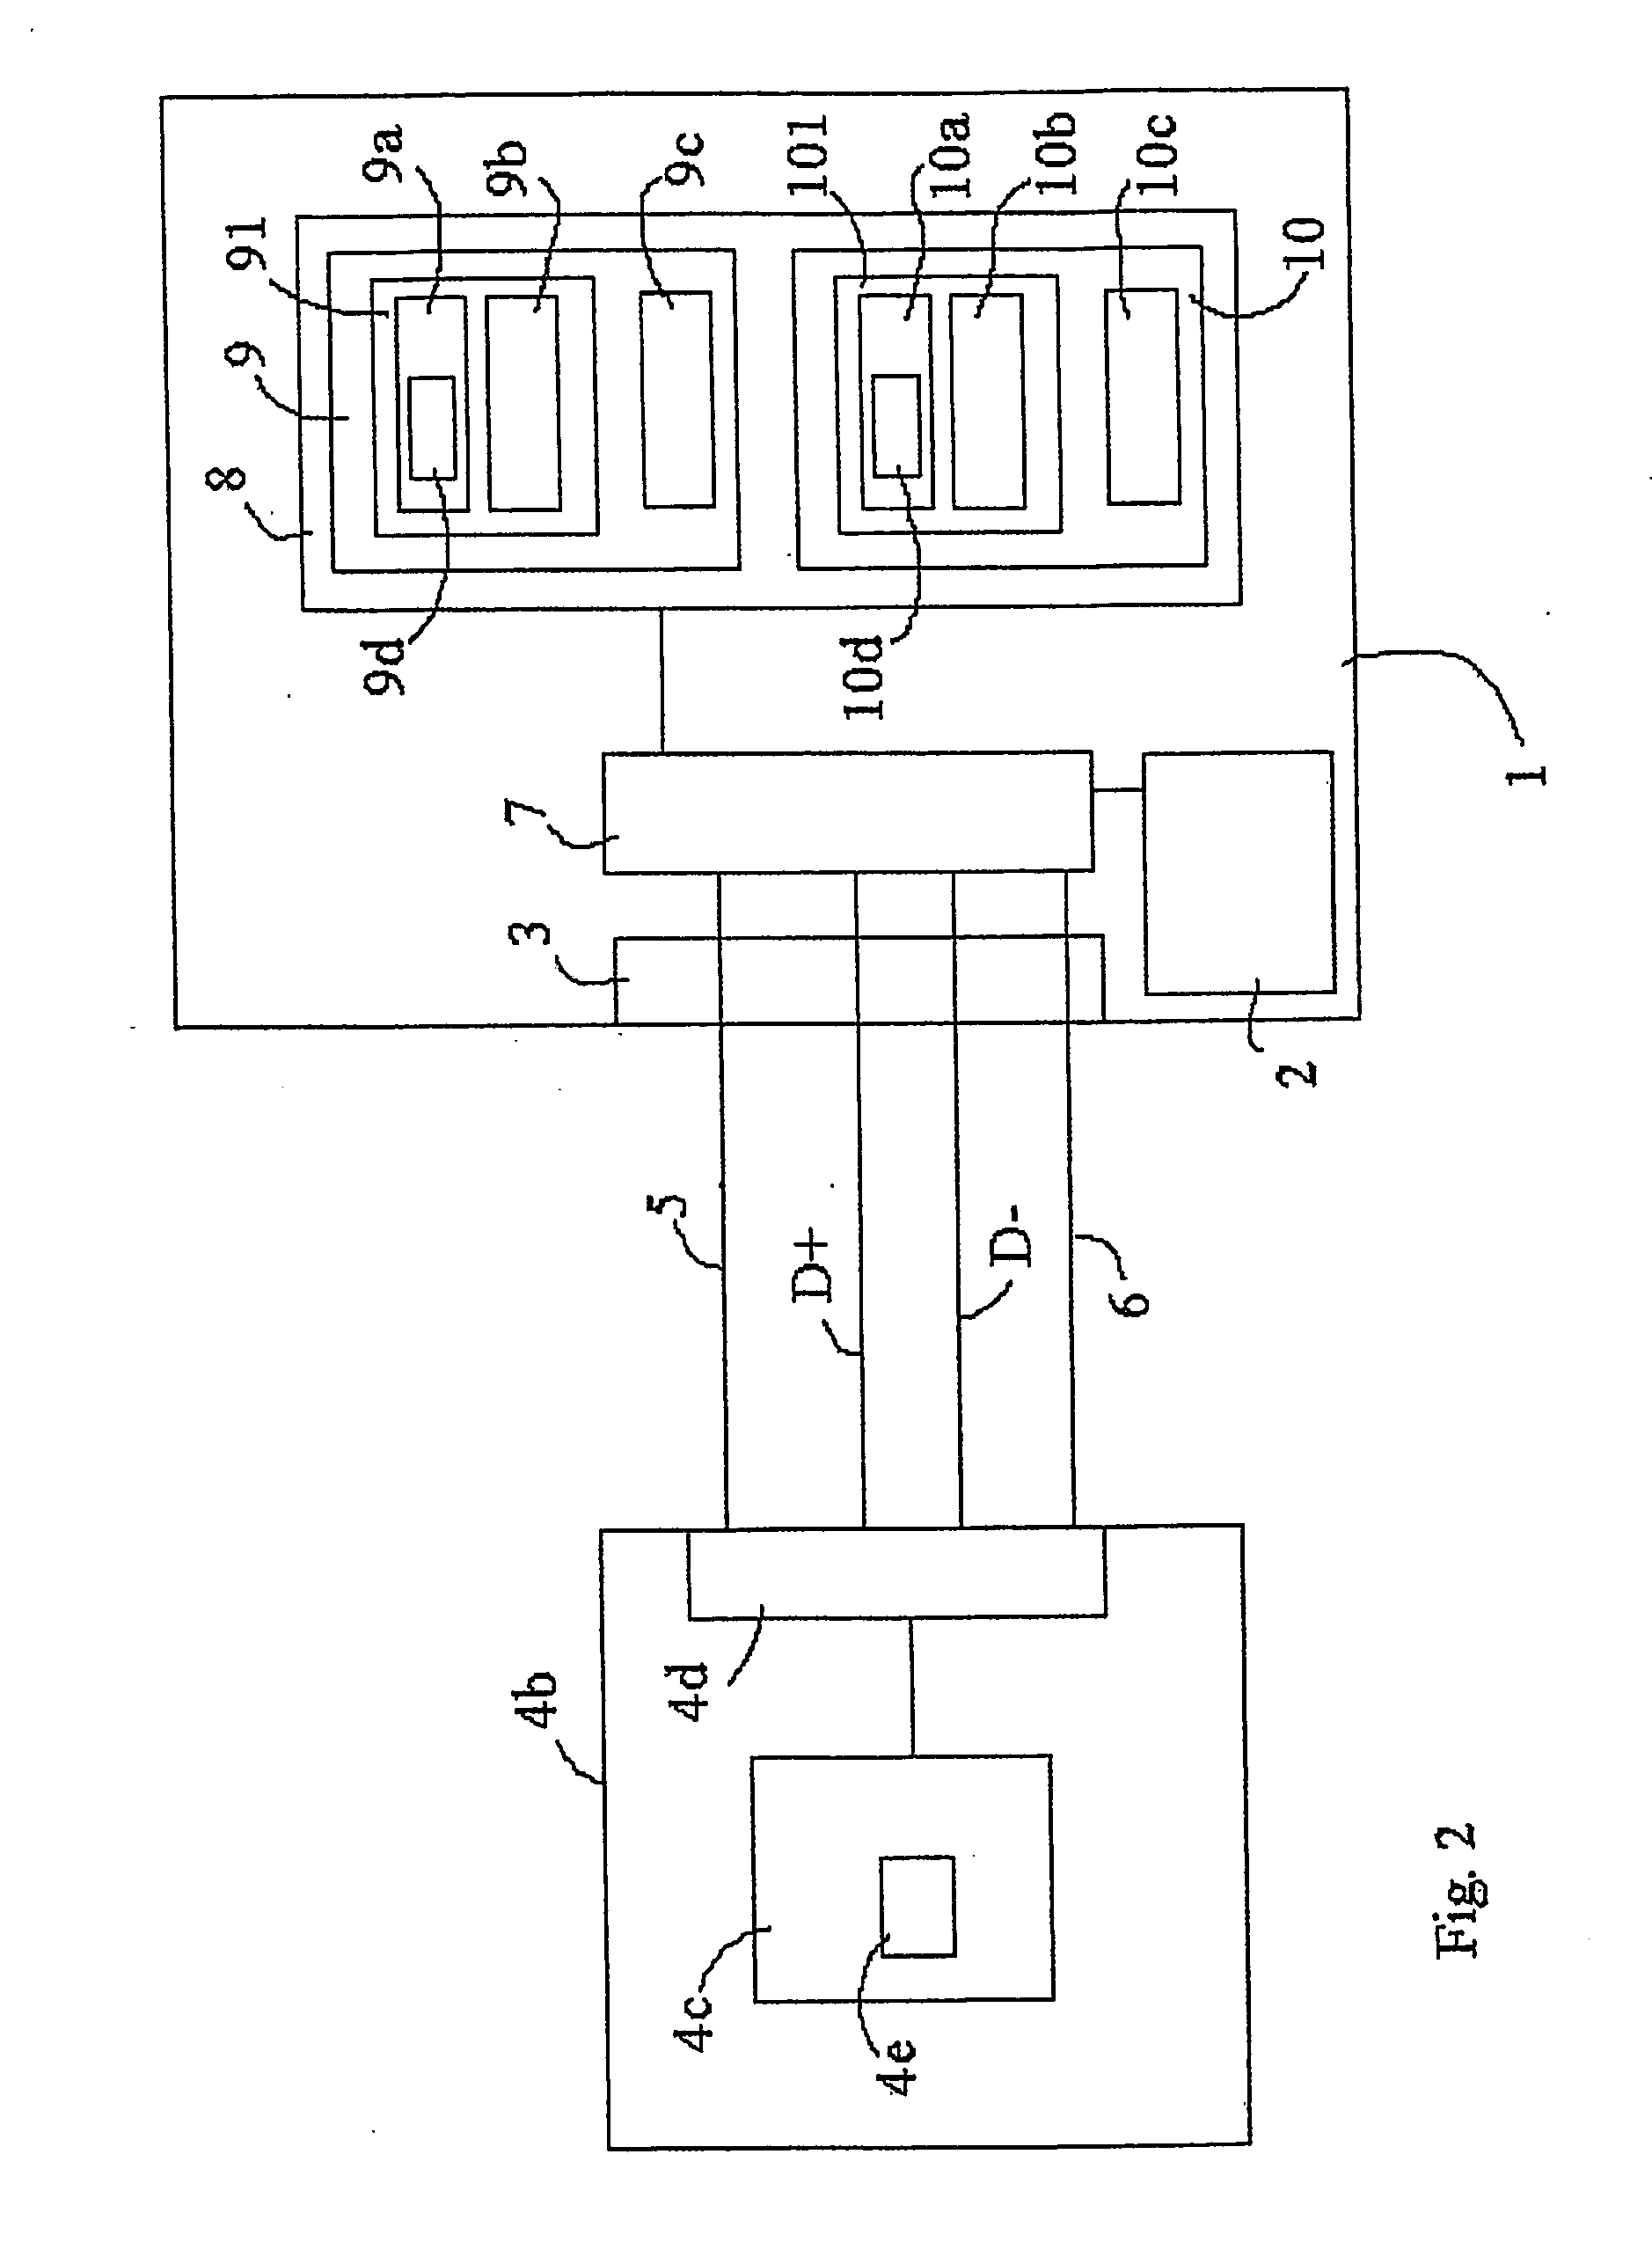 Charging system for charging accumulator means in an electronic device, and a charging apparatus and an electronic device for the system